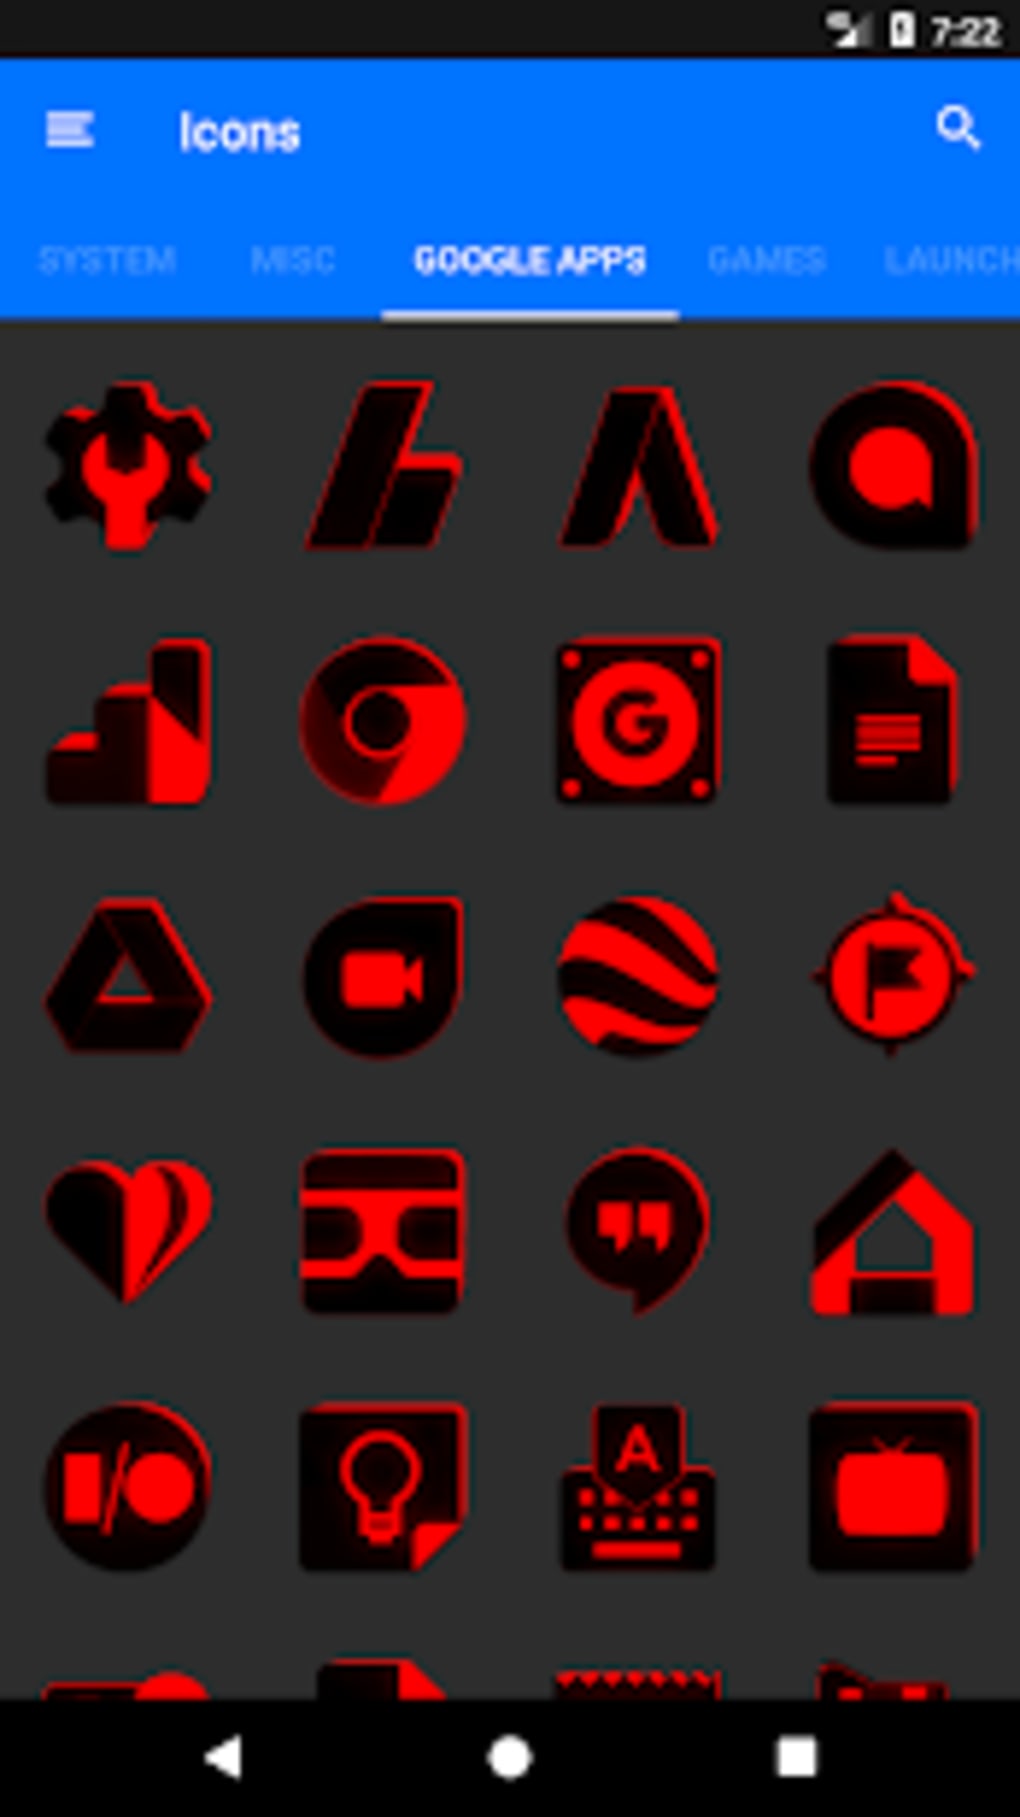 Play Games Icon, Android L Iconpack